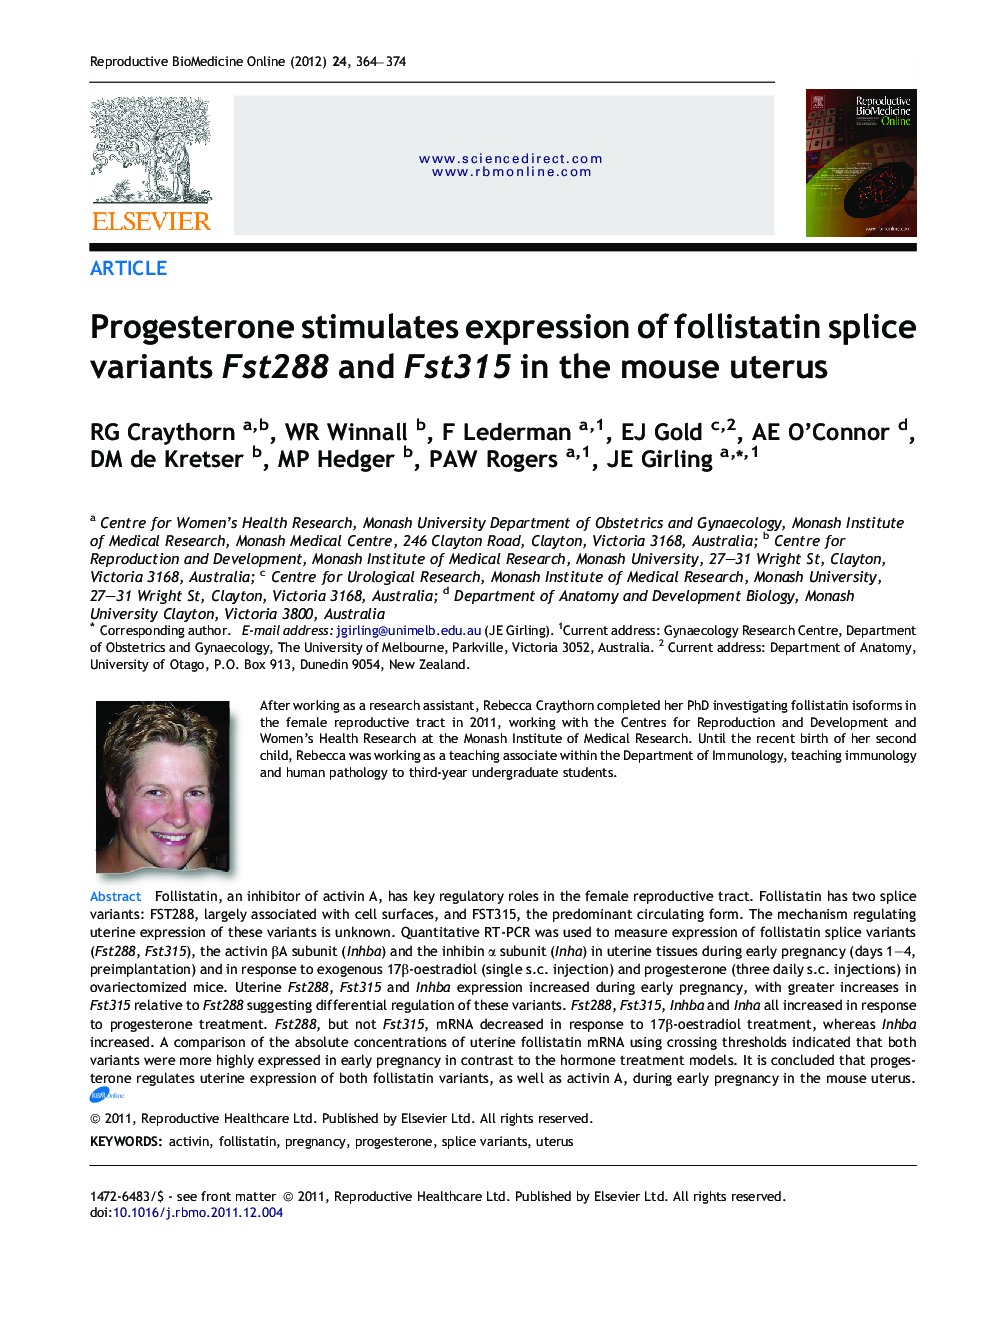 Progesterone stimulates expression of follistatin splice variants Fst288 and Fst315 in the mouse uterus 